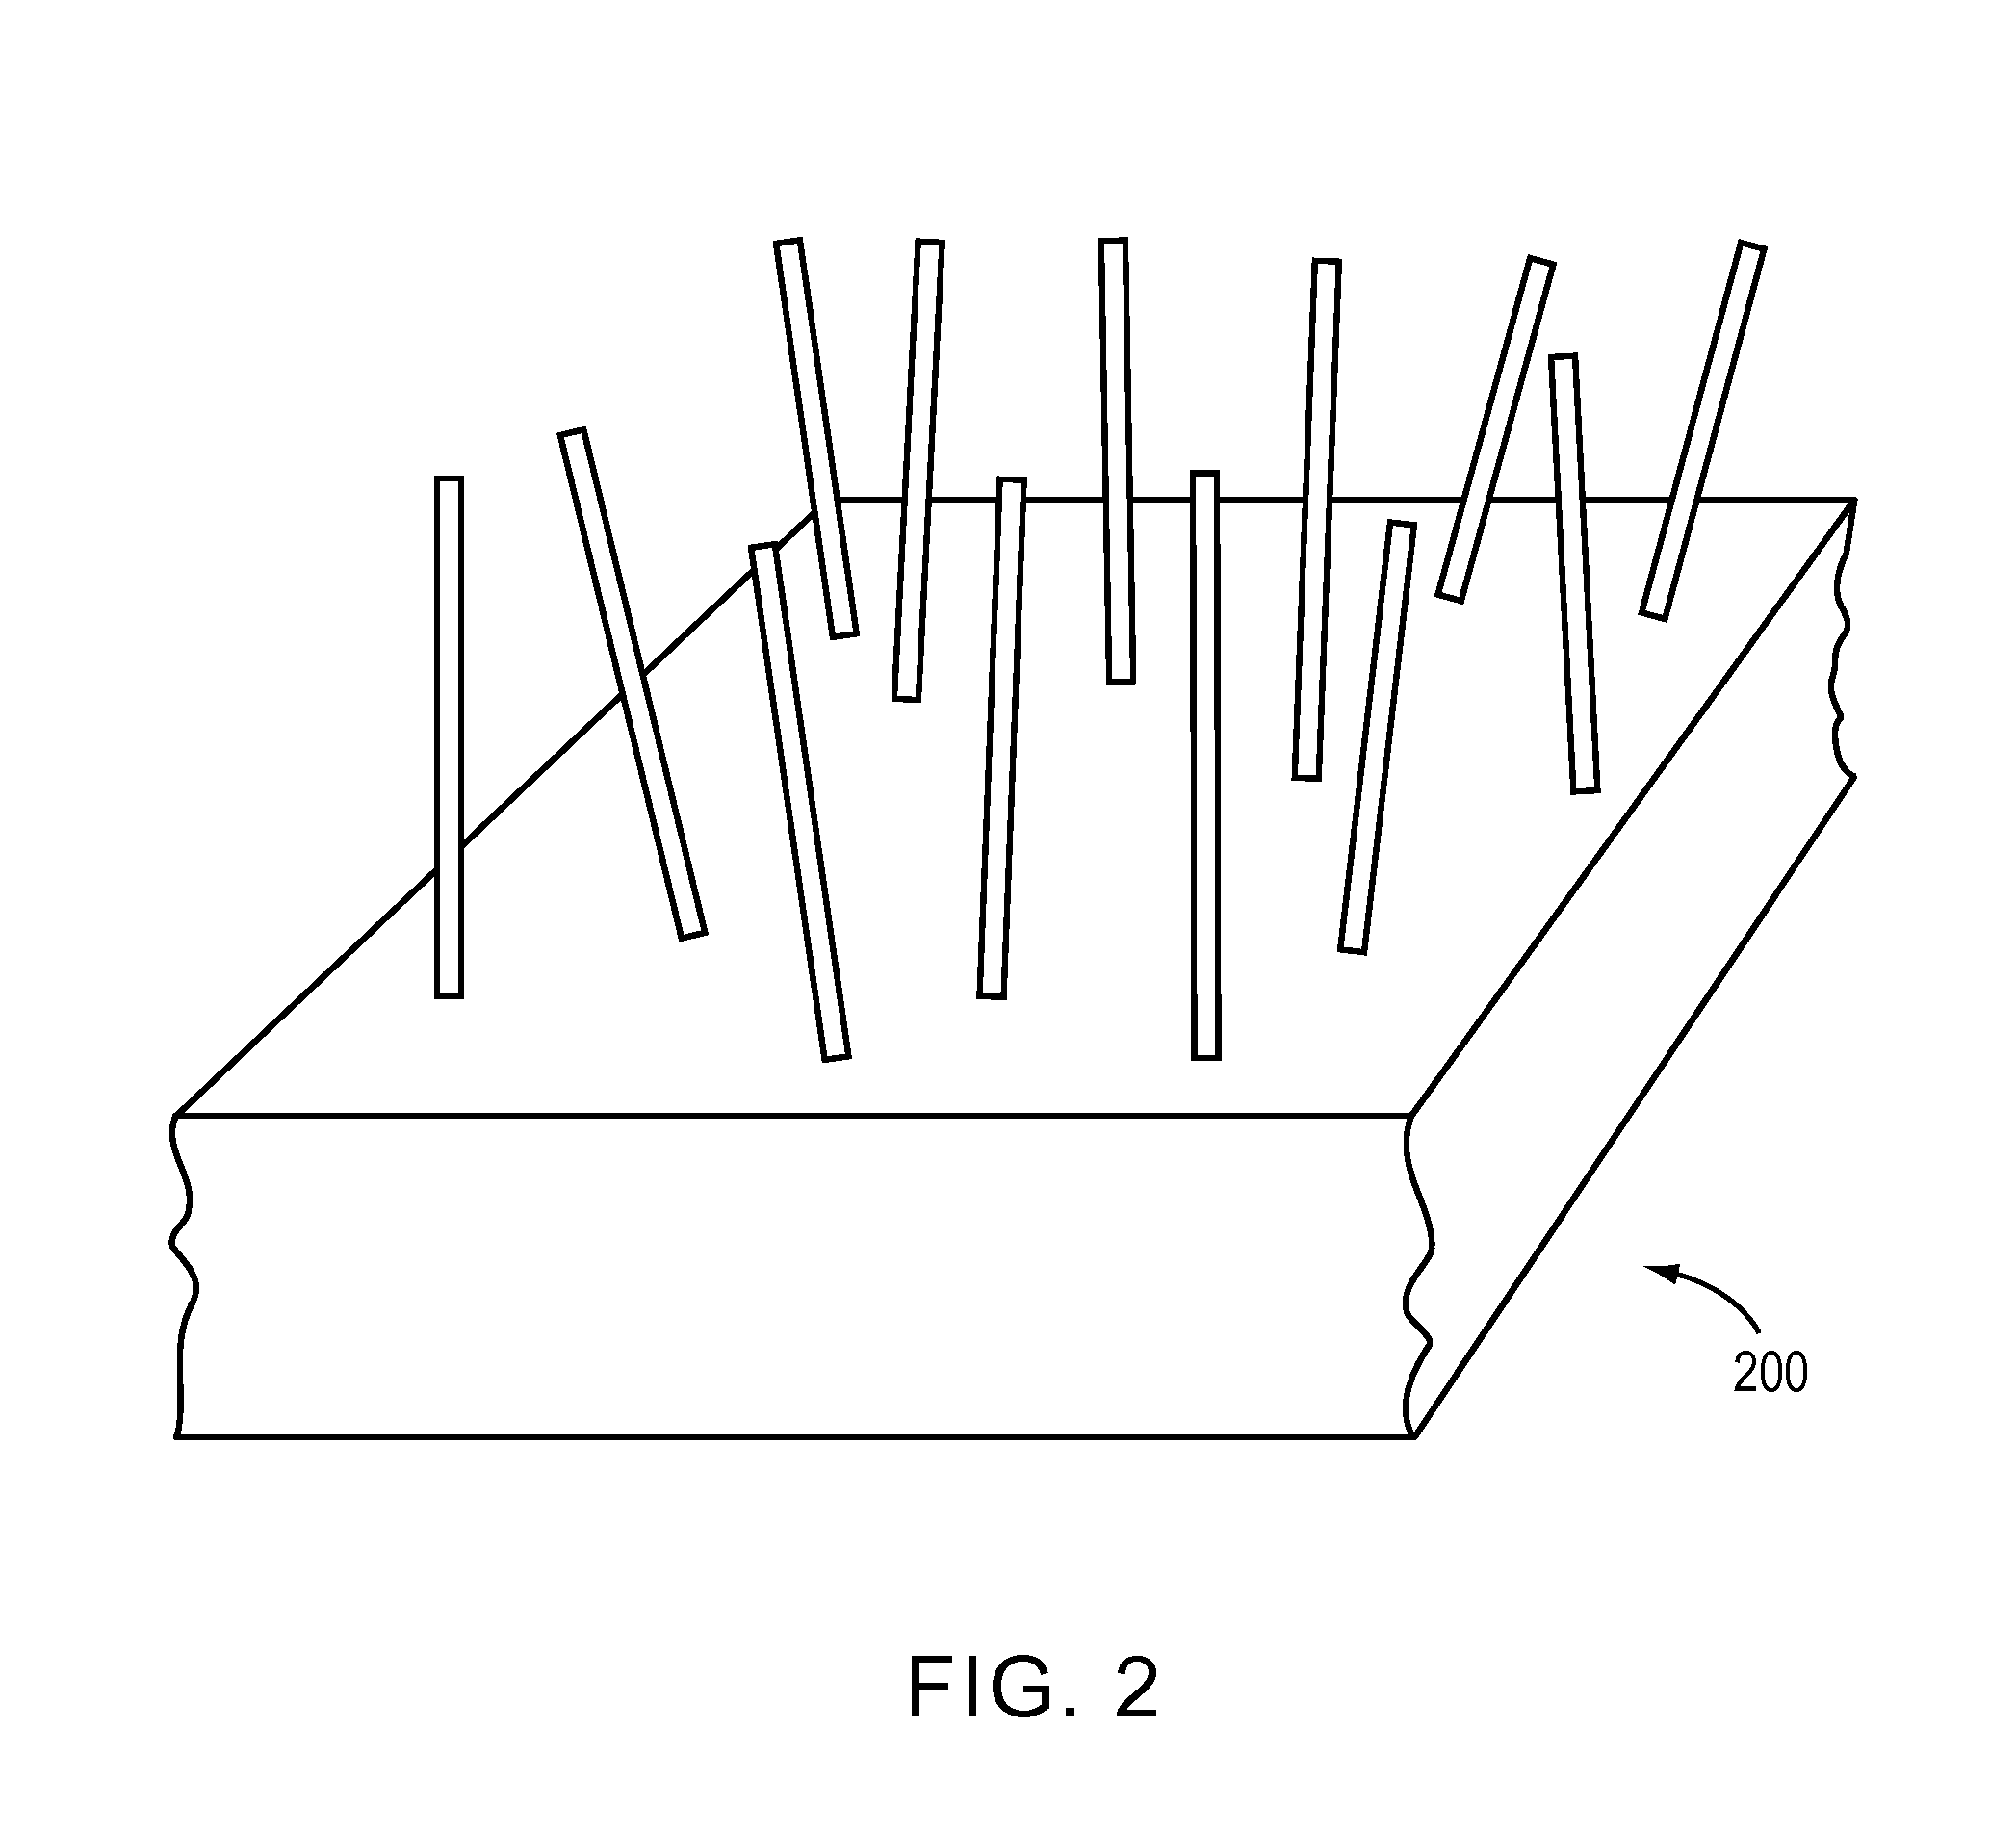 Method for creating micro/nano wind energy gathering devices